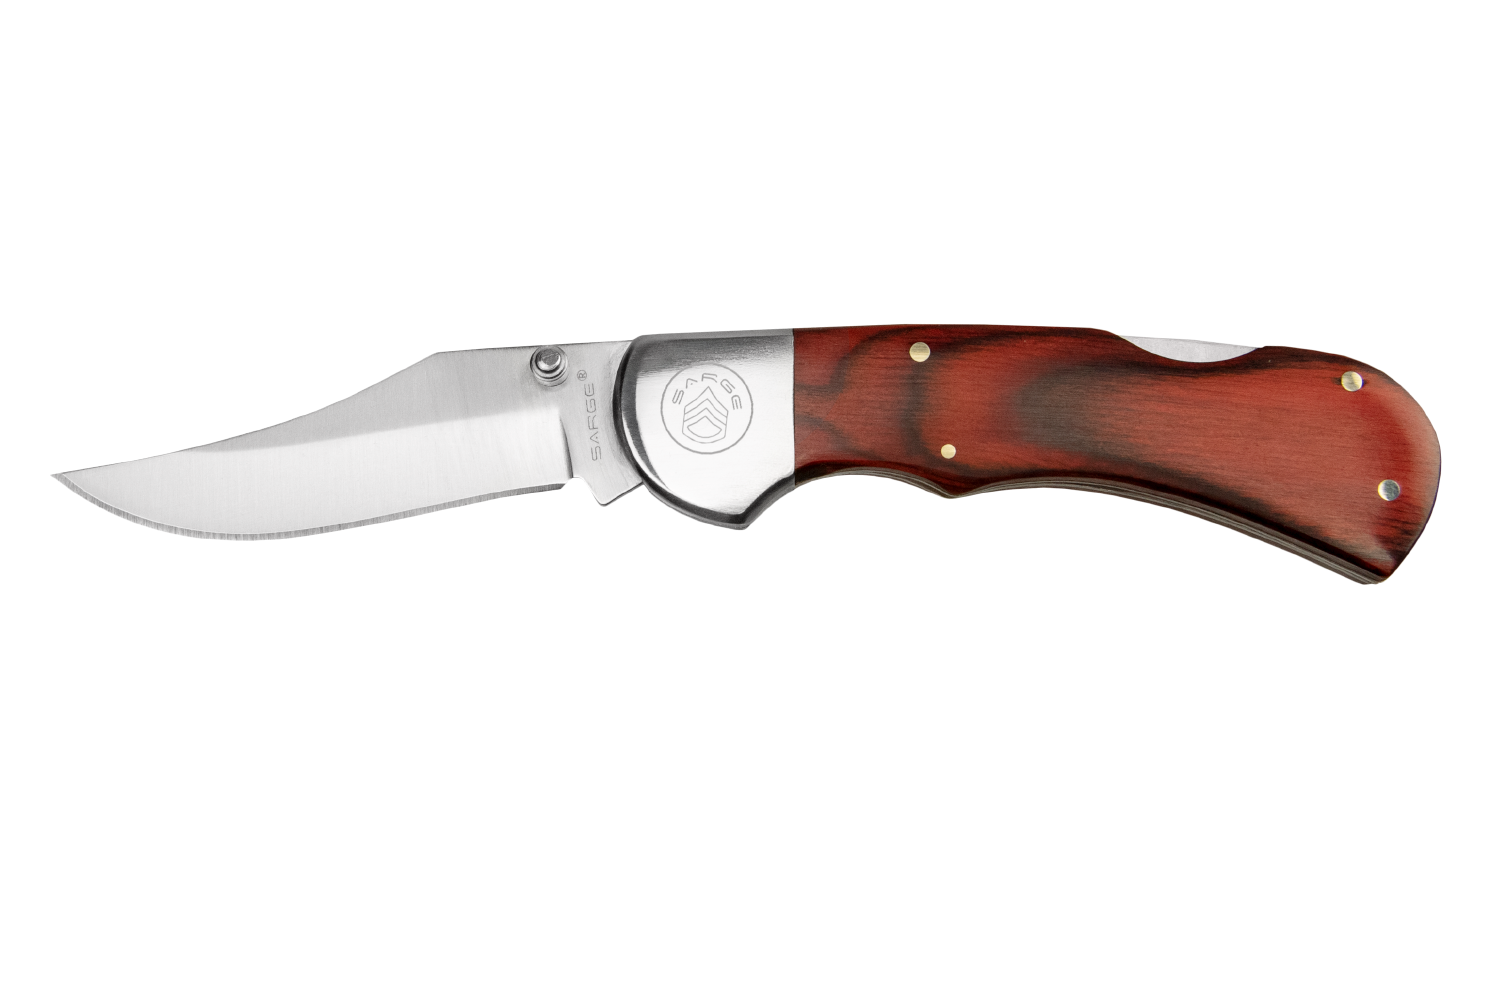 Sarge Knives | Quality Knife | Quality Knives - Sarge Knives